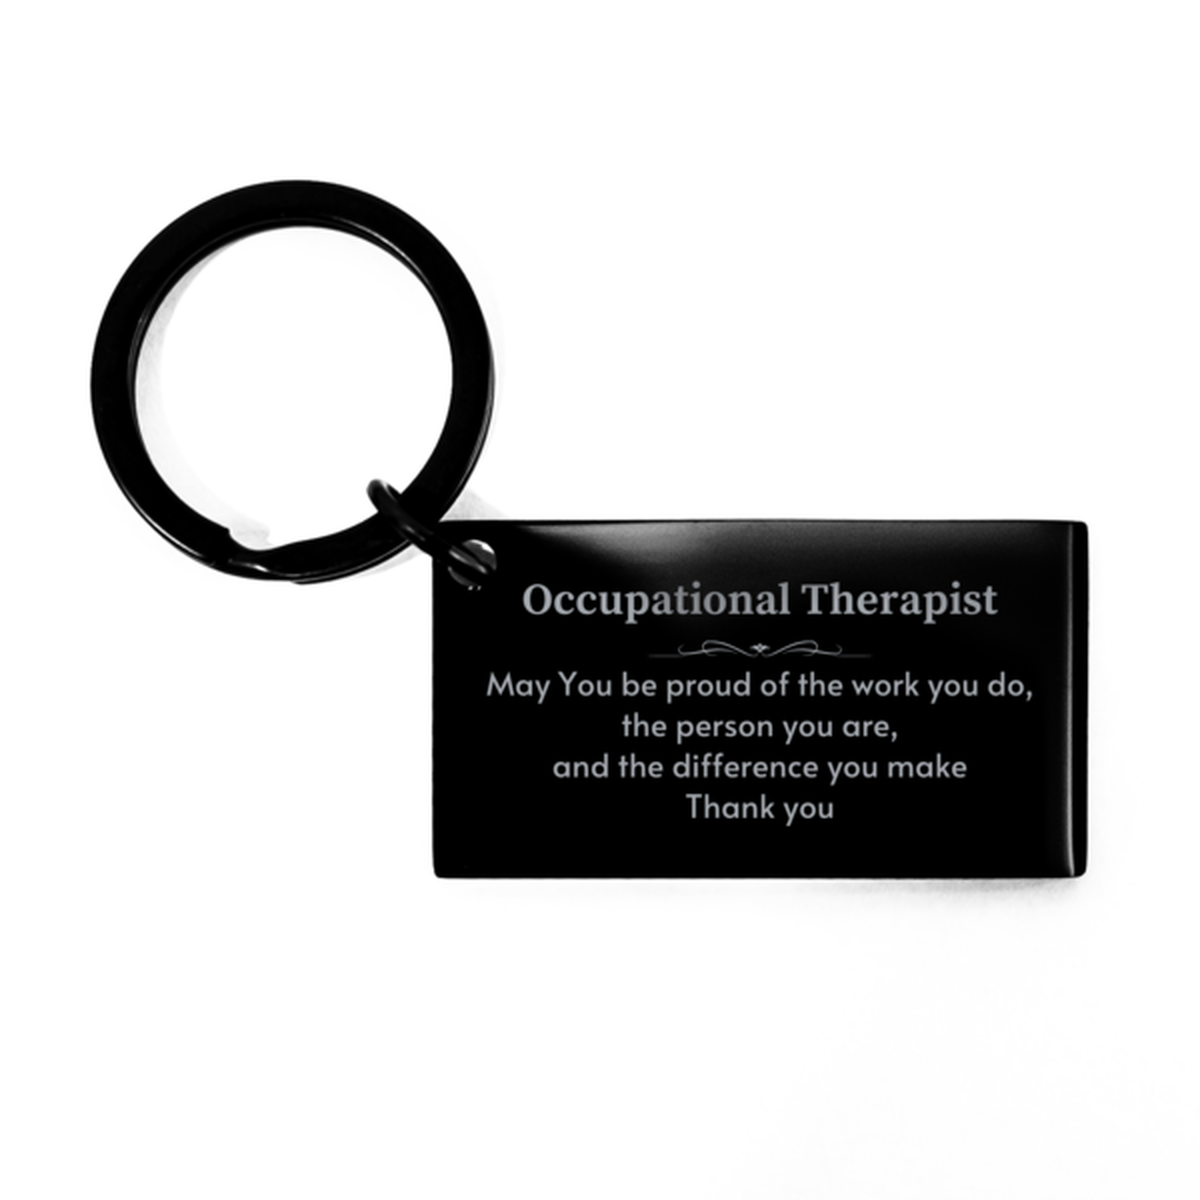 Heartwarming Keychain Retirement Coworkers Gifts for Occupational Therapist, Physical Therapist May You be proud of the work you do, the person you are Gifts for Boss Men Women Friends